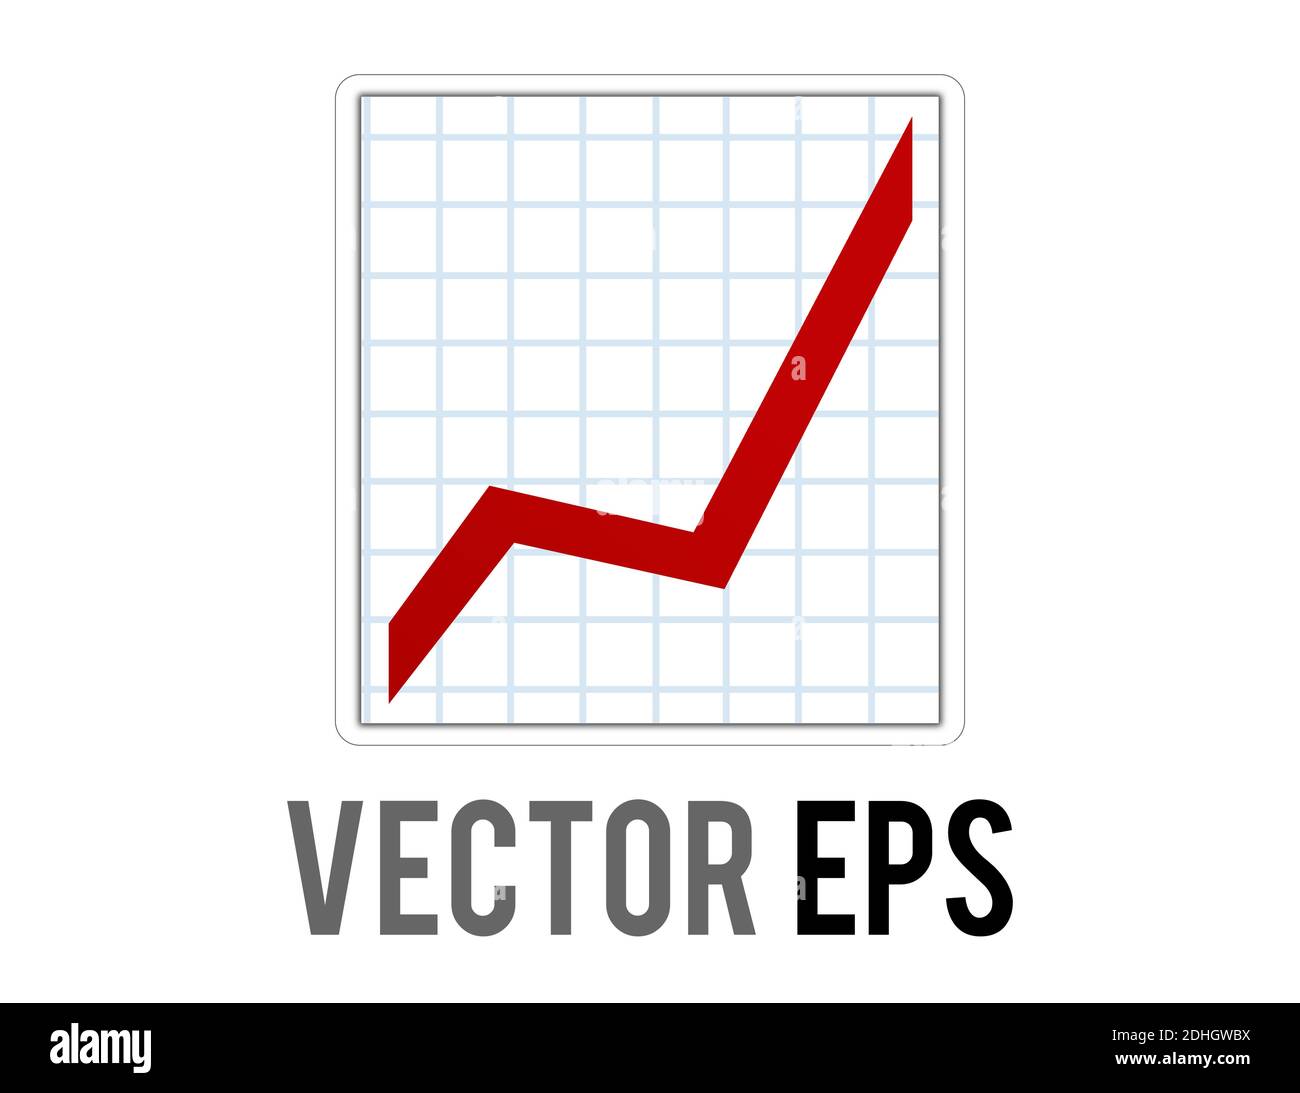 The Vector business presentation summary finance report bar chart increasing icon showing three different colored vertical rectangles Stock Vector